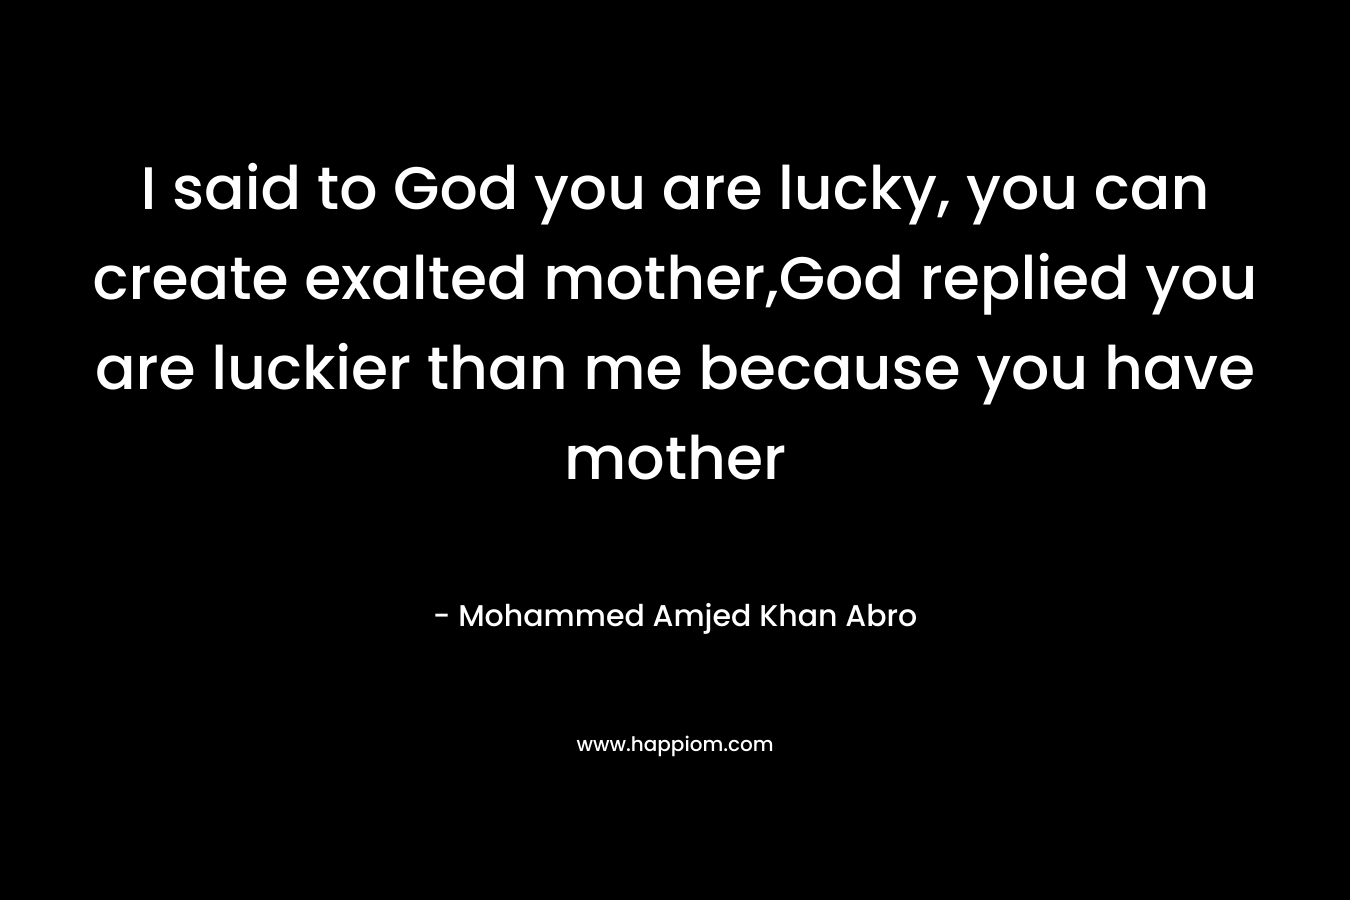 I said to God you are lucky, you can create exalted mother,God replied you are luckier than me because you have mother